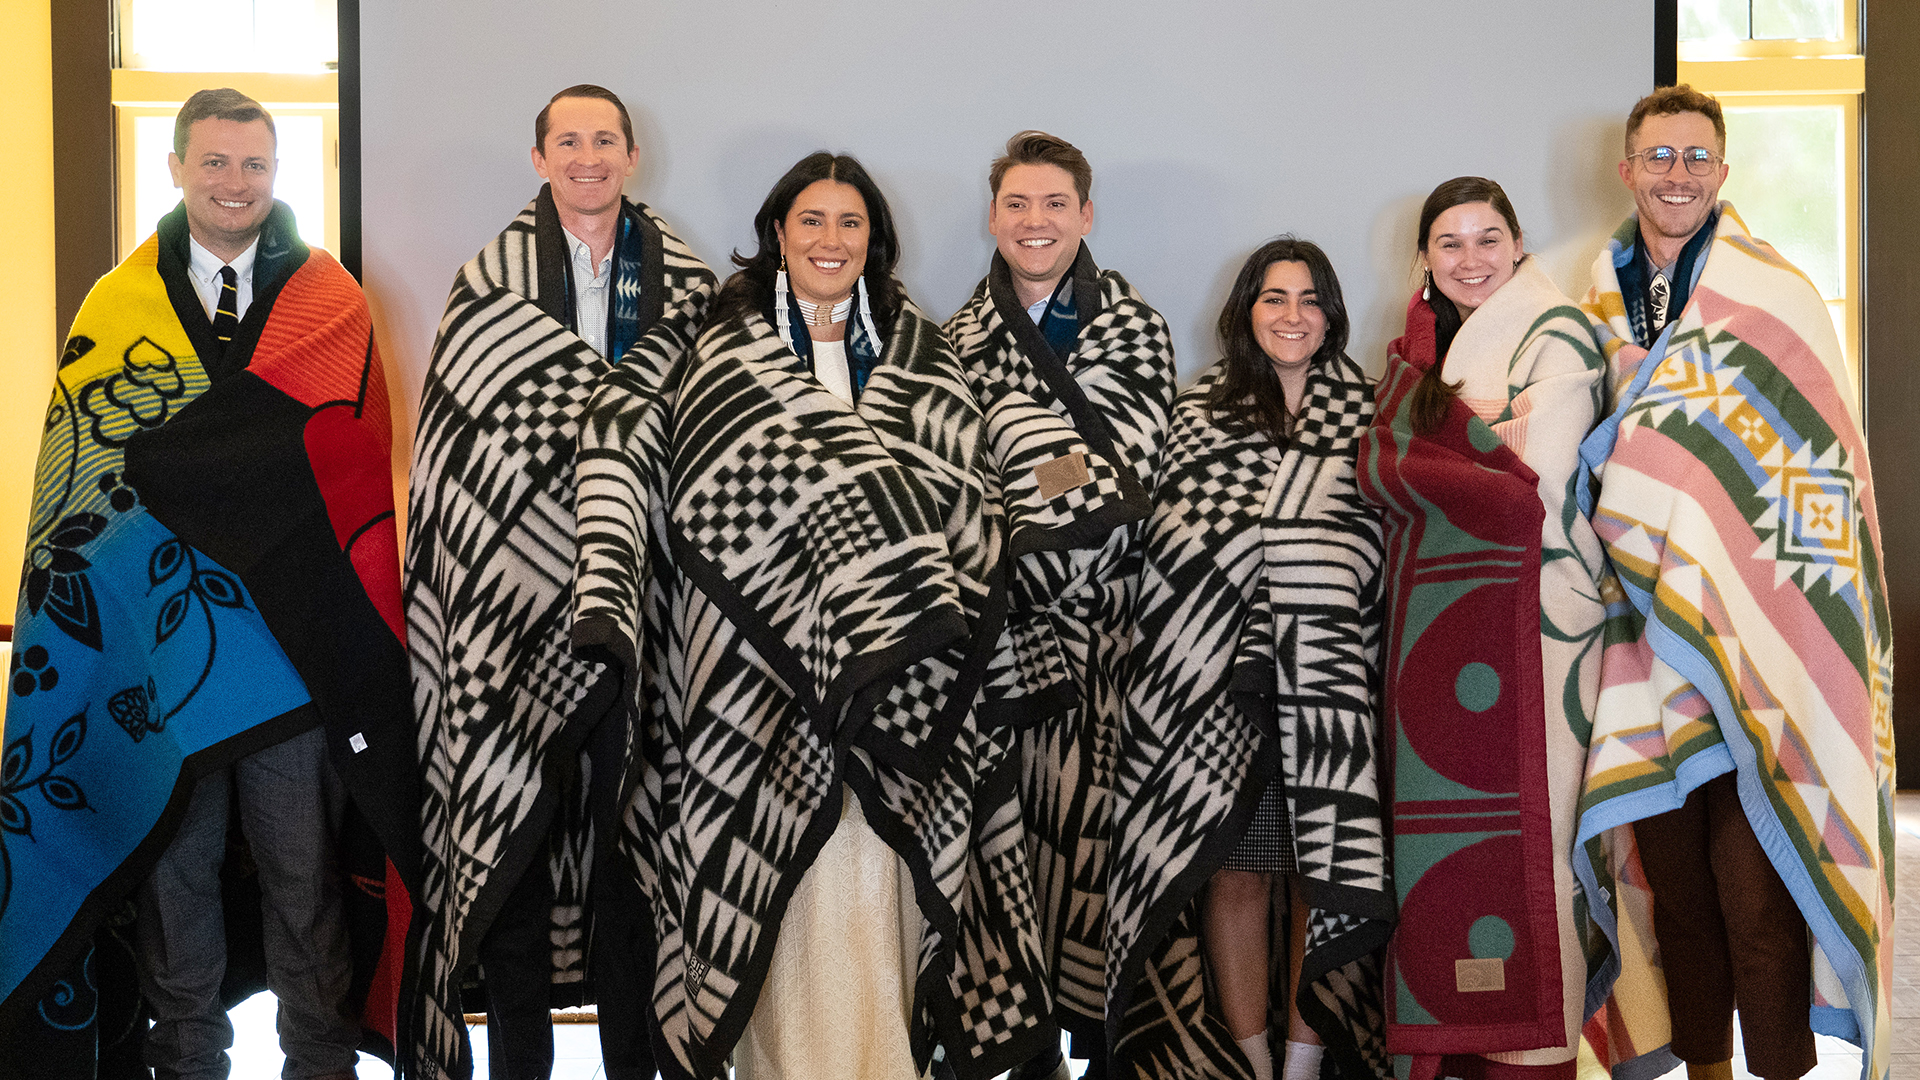 Seven Native law students stand with their new Native blankets they received at their graduation ceremony